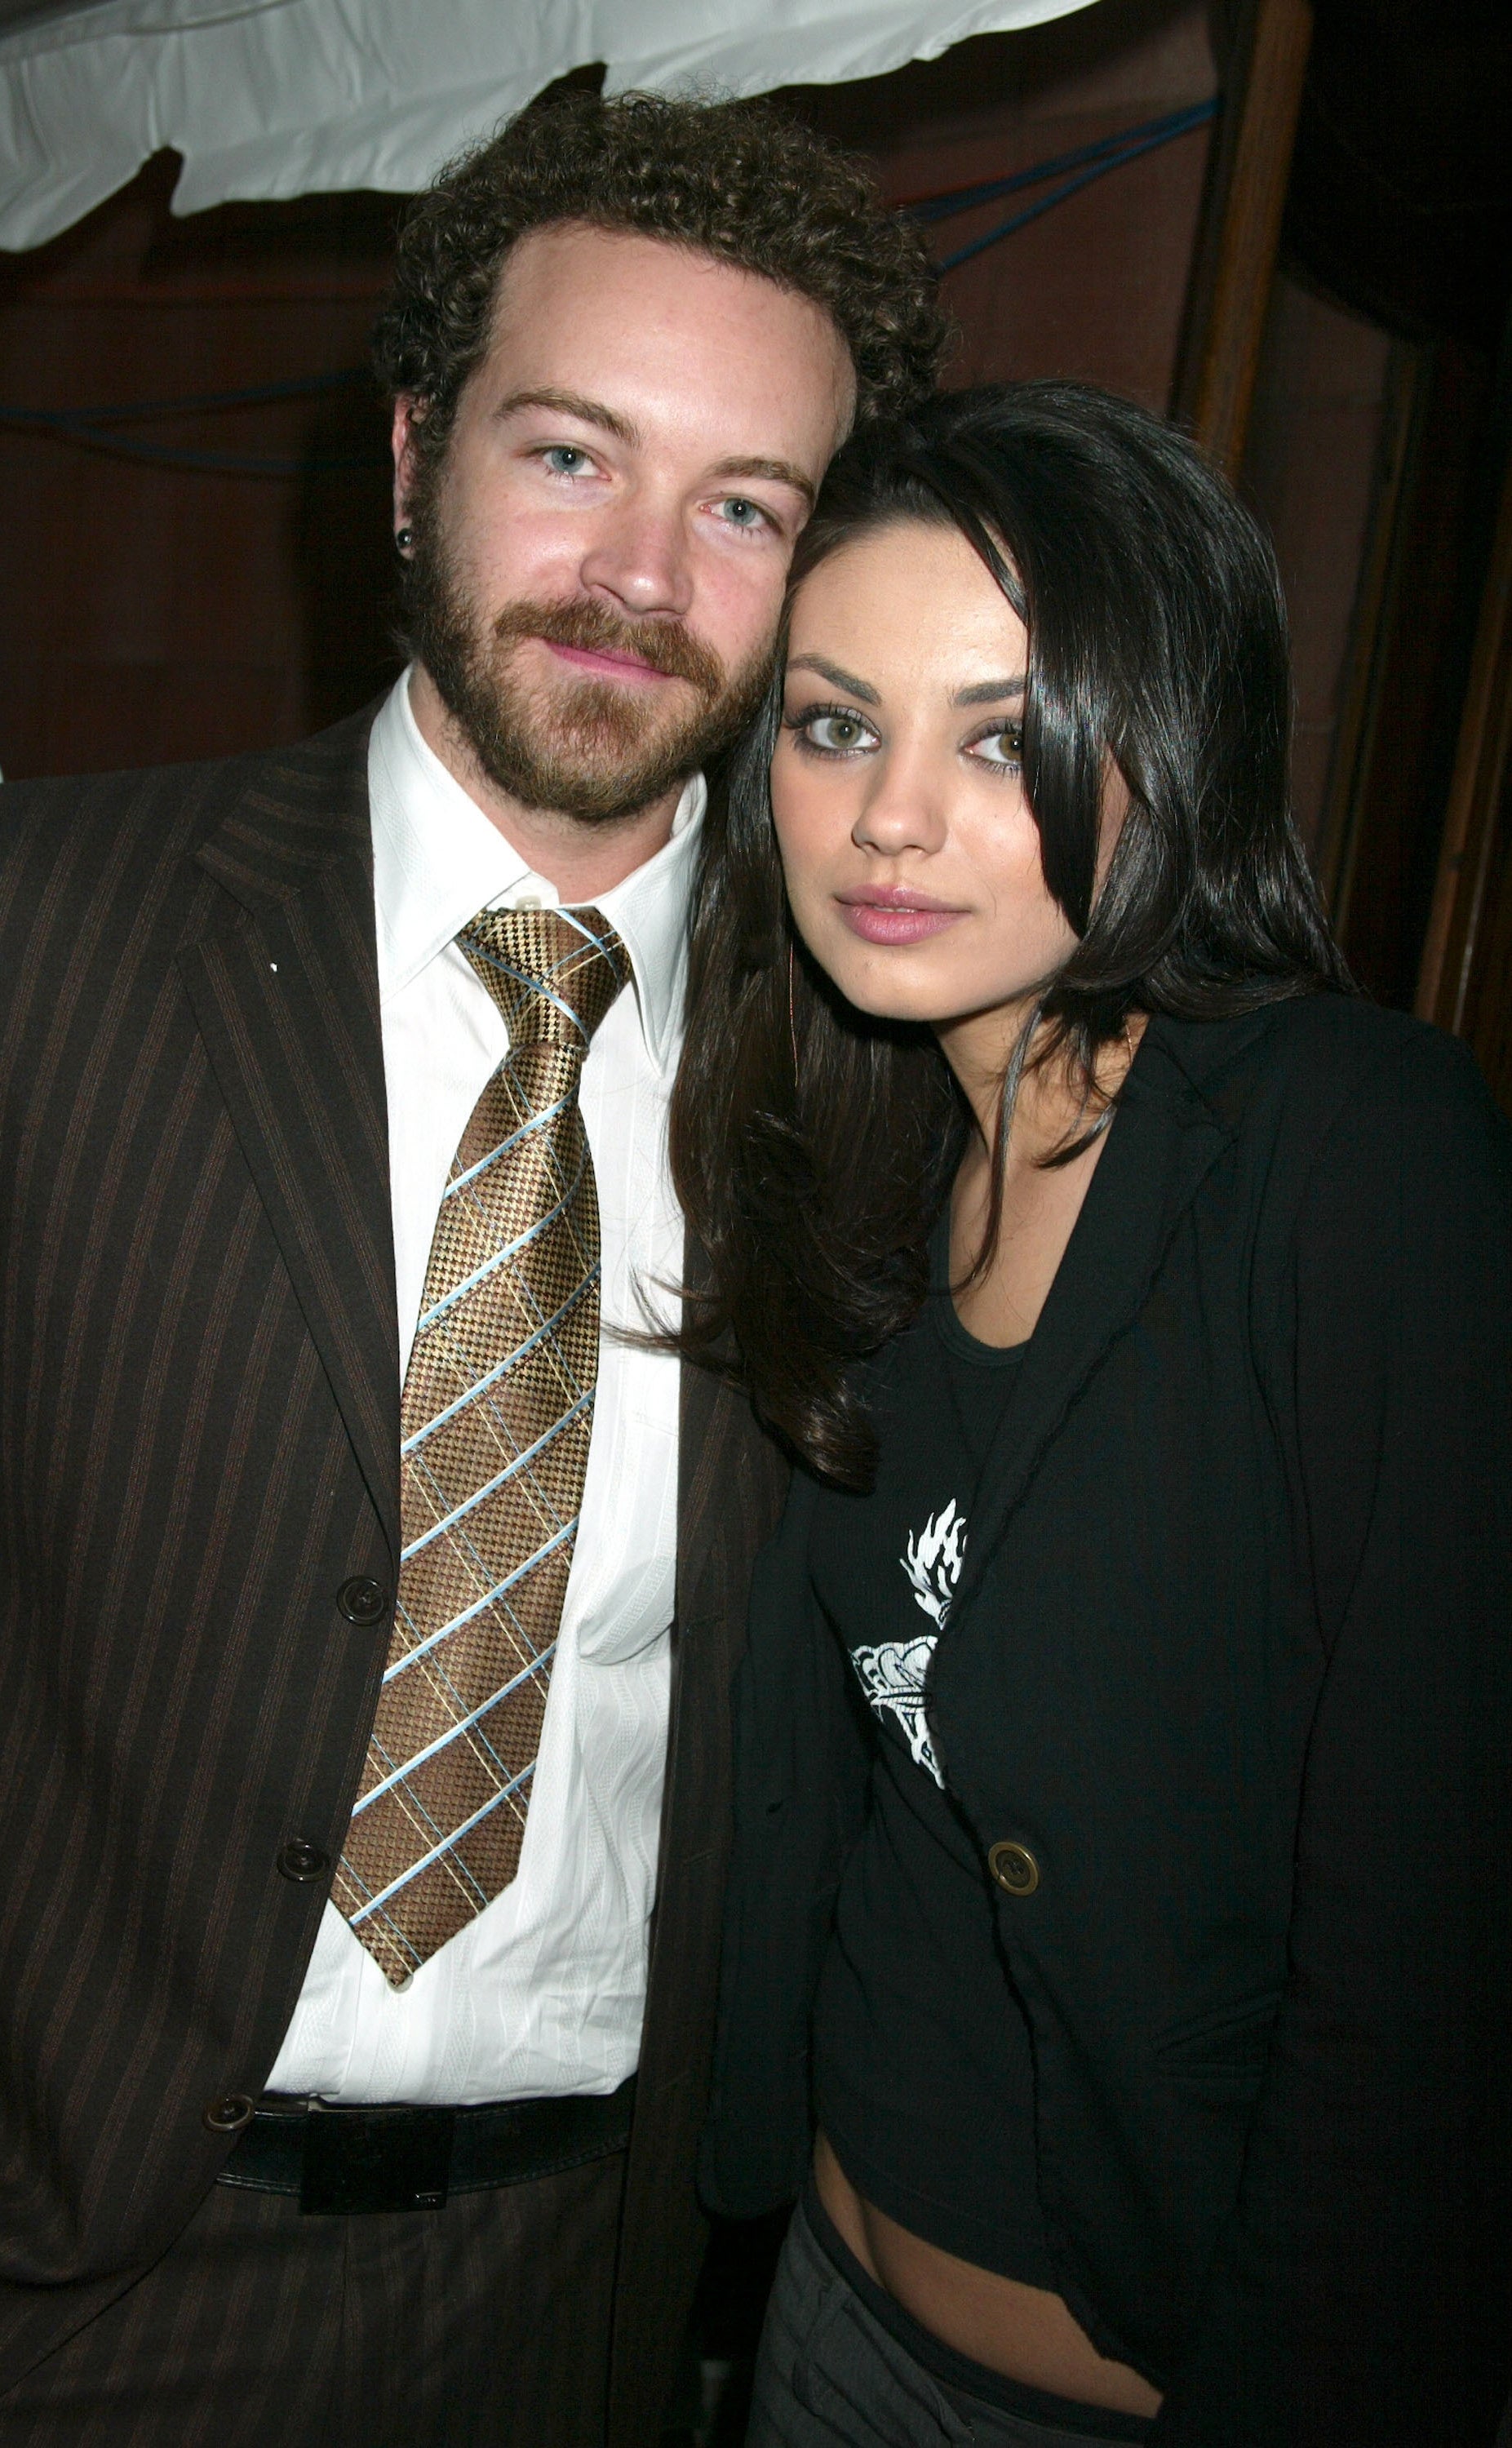 Close-up of Danny and Mila standing close together